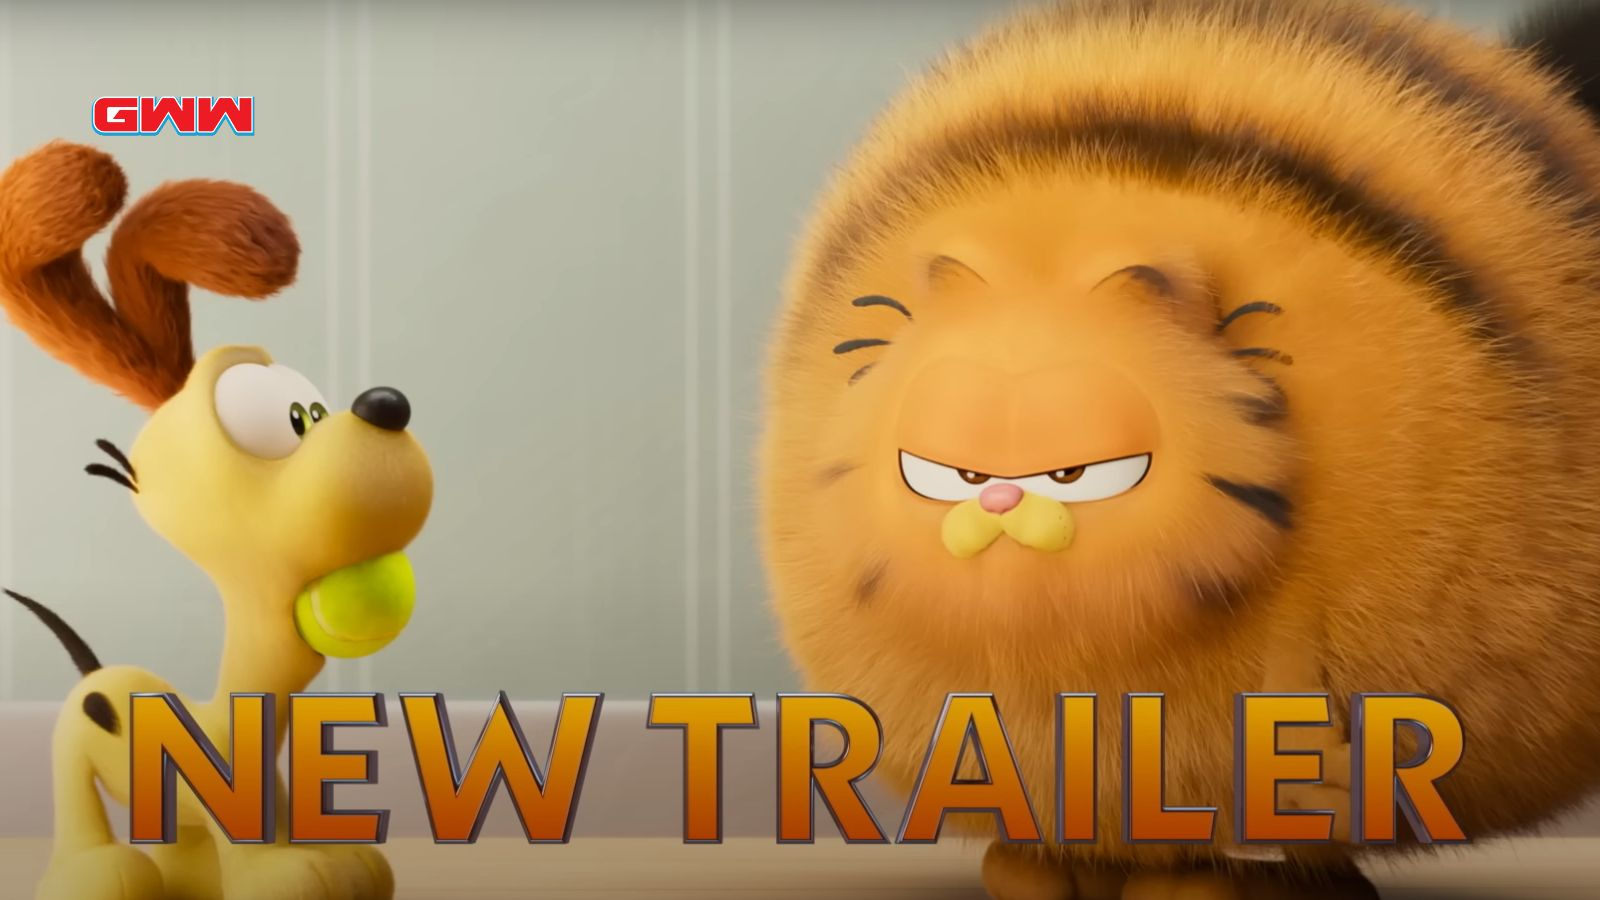 Angry fluffy Garfield and surprised dog Odie.